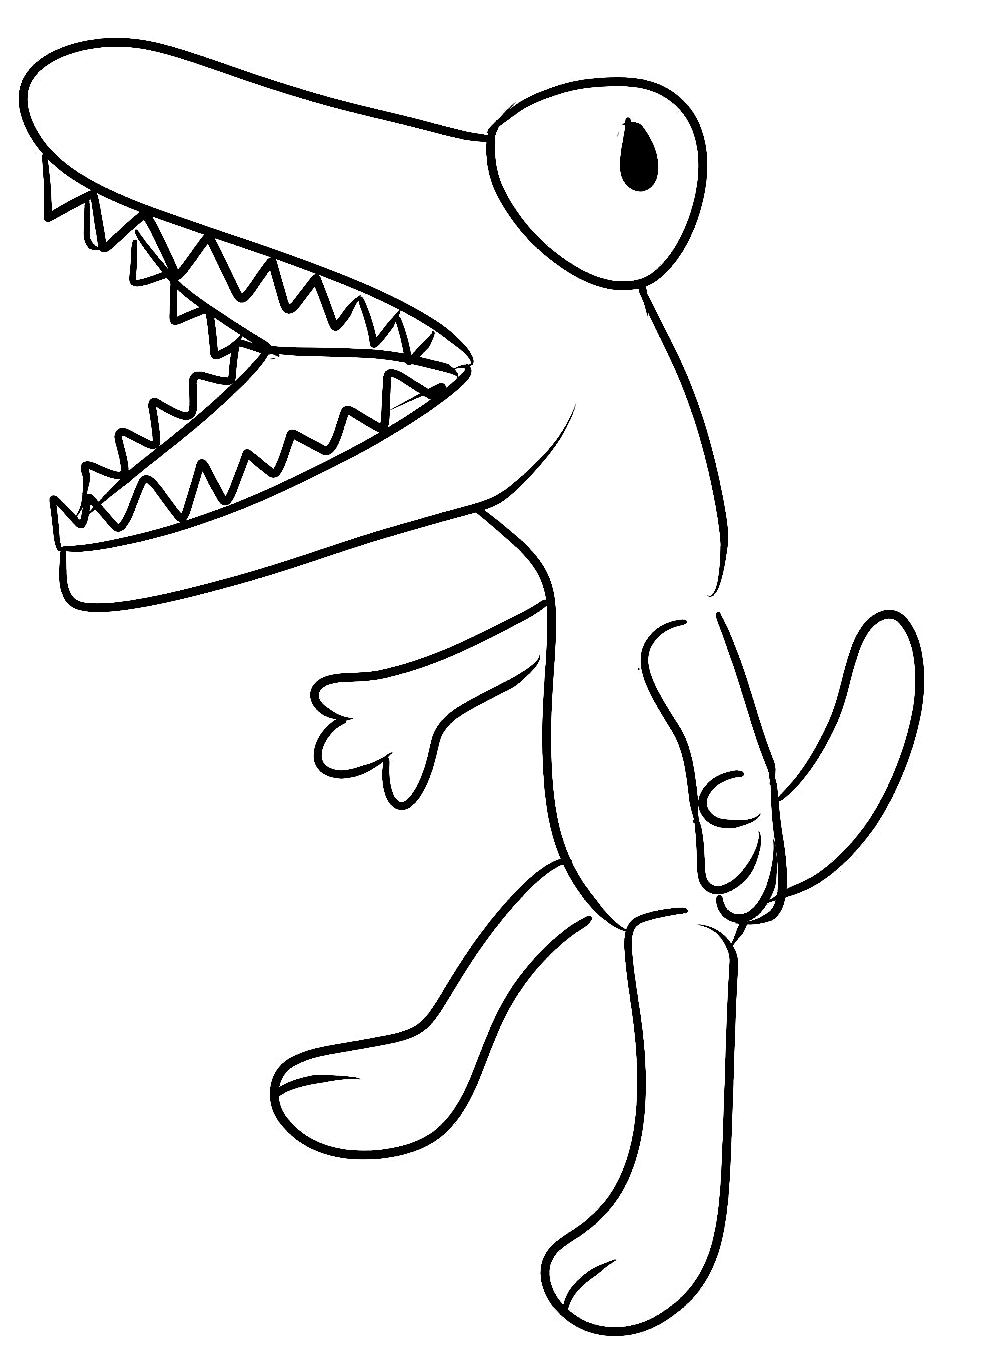 Orange from Rainbow Friends Coloring Page